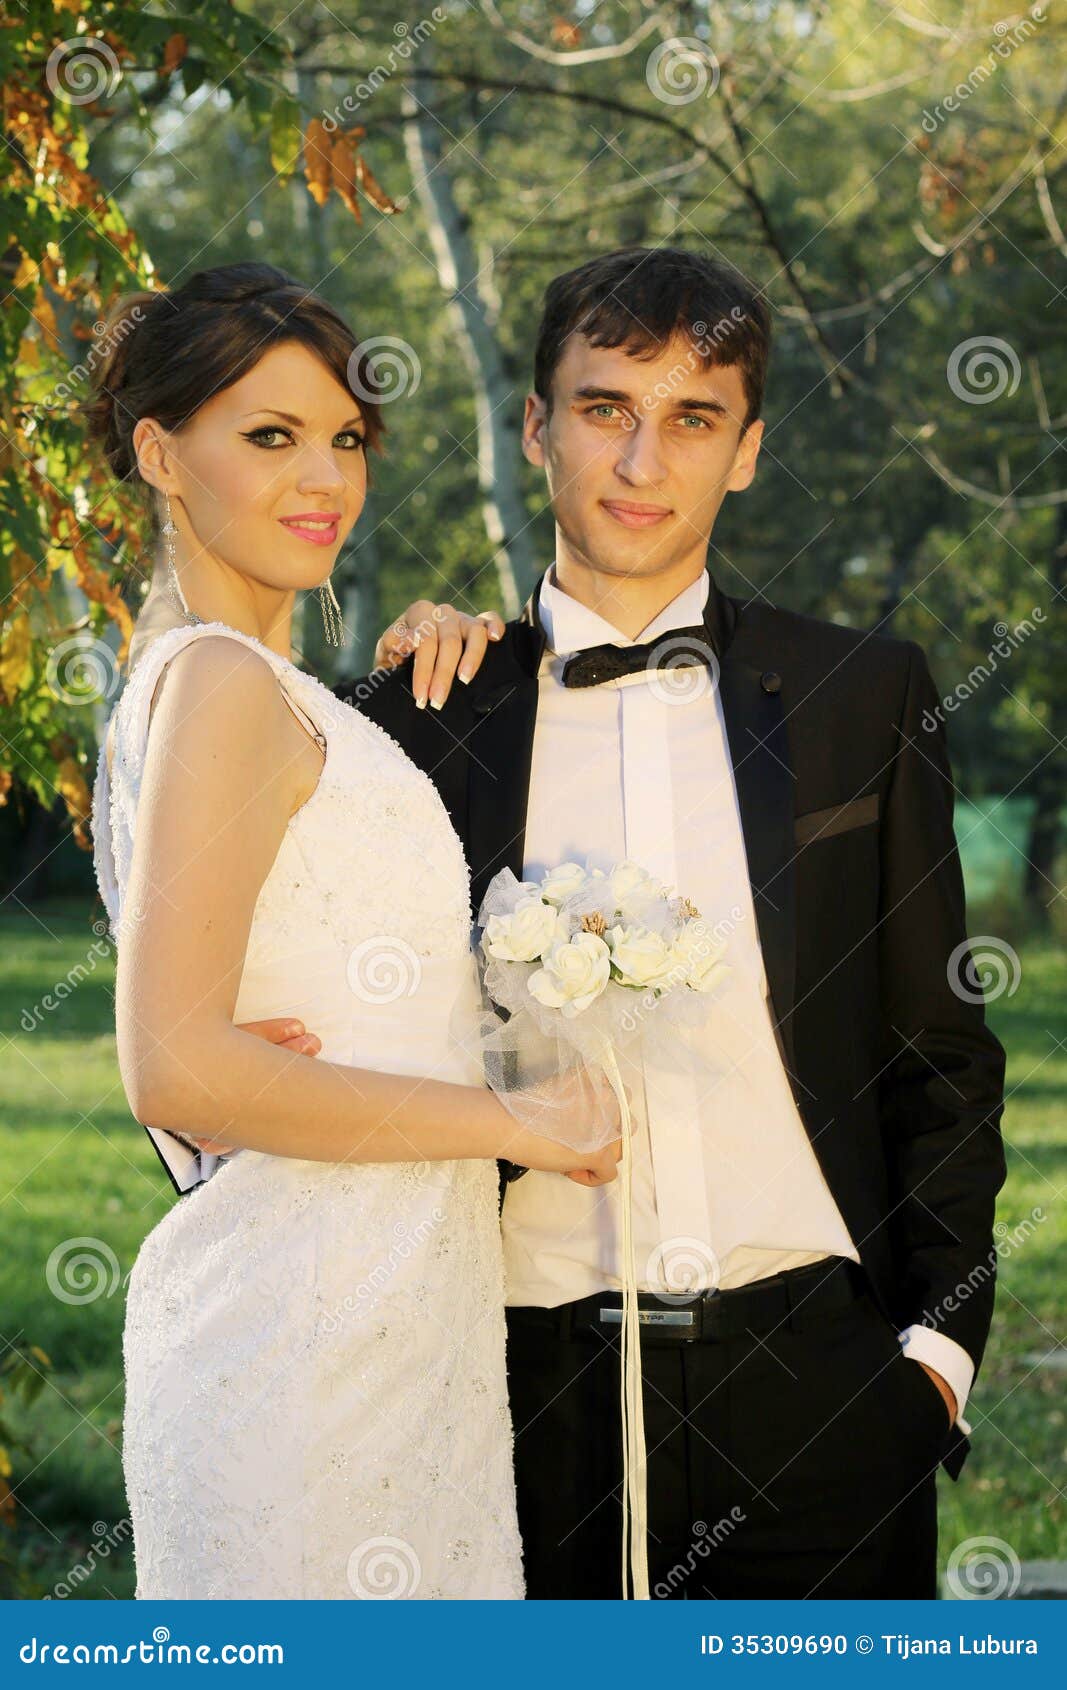 Couple married in nature stock photo. Image of young - 35309690